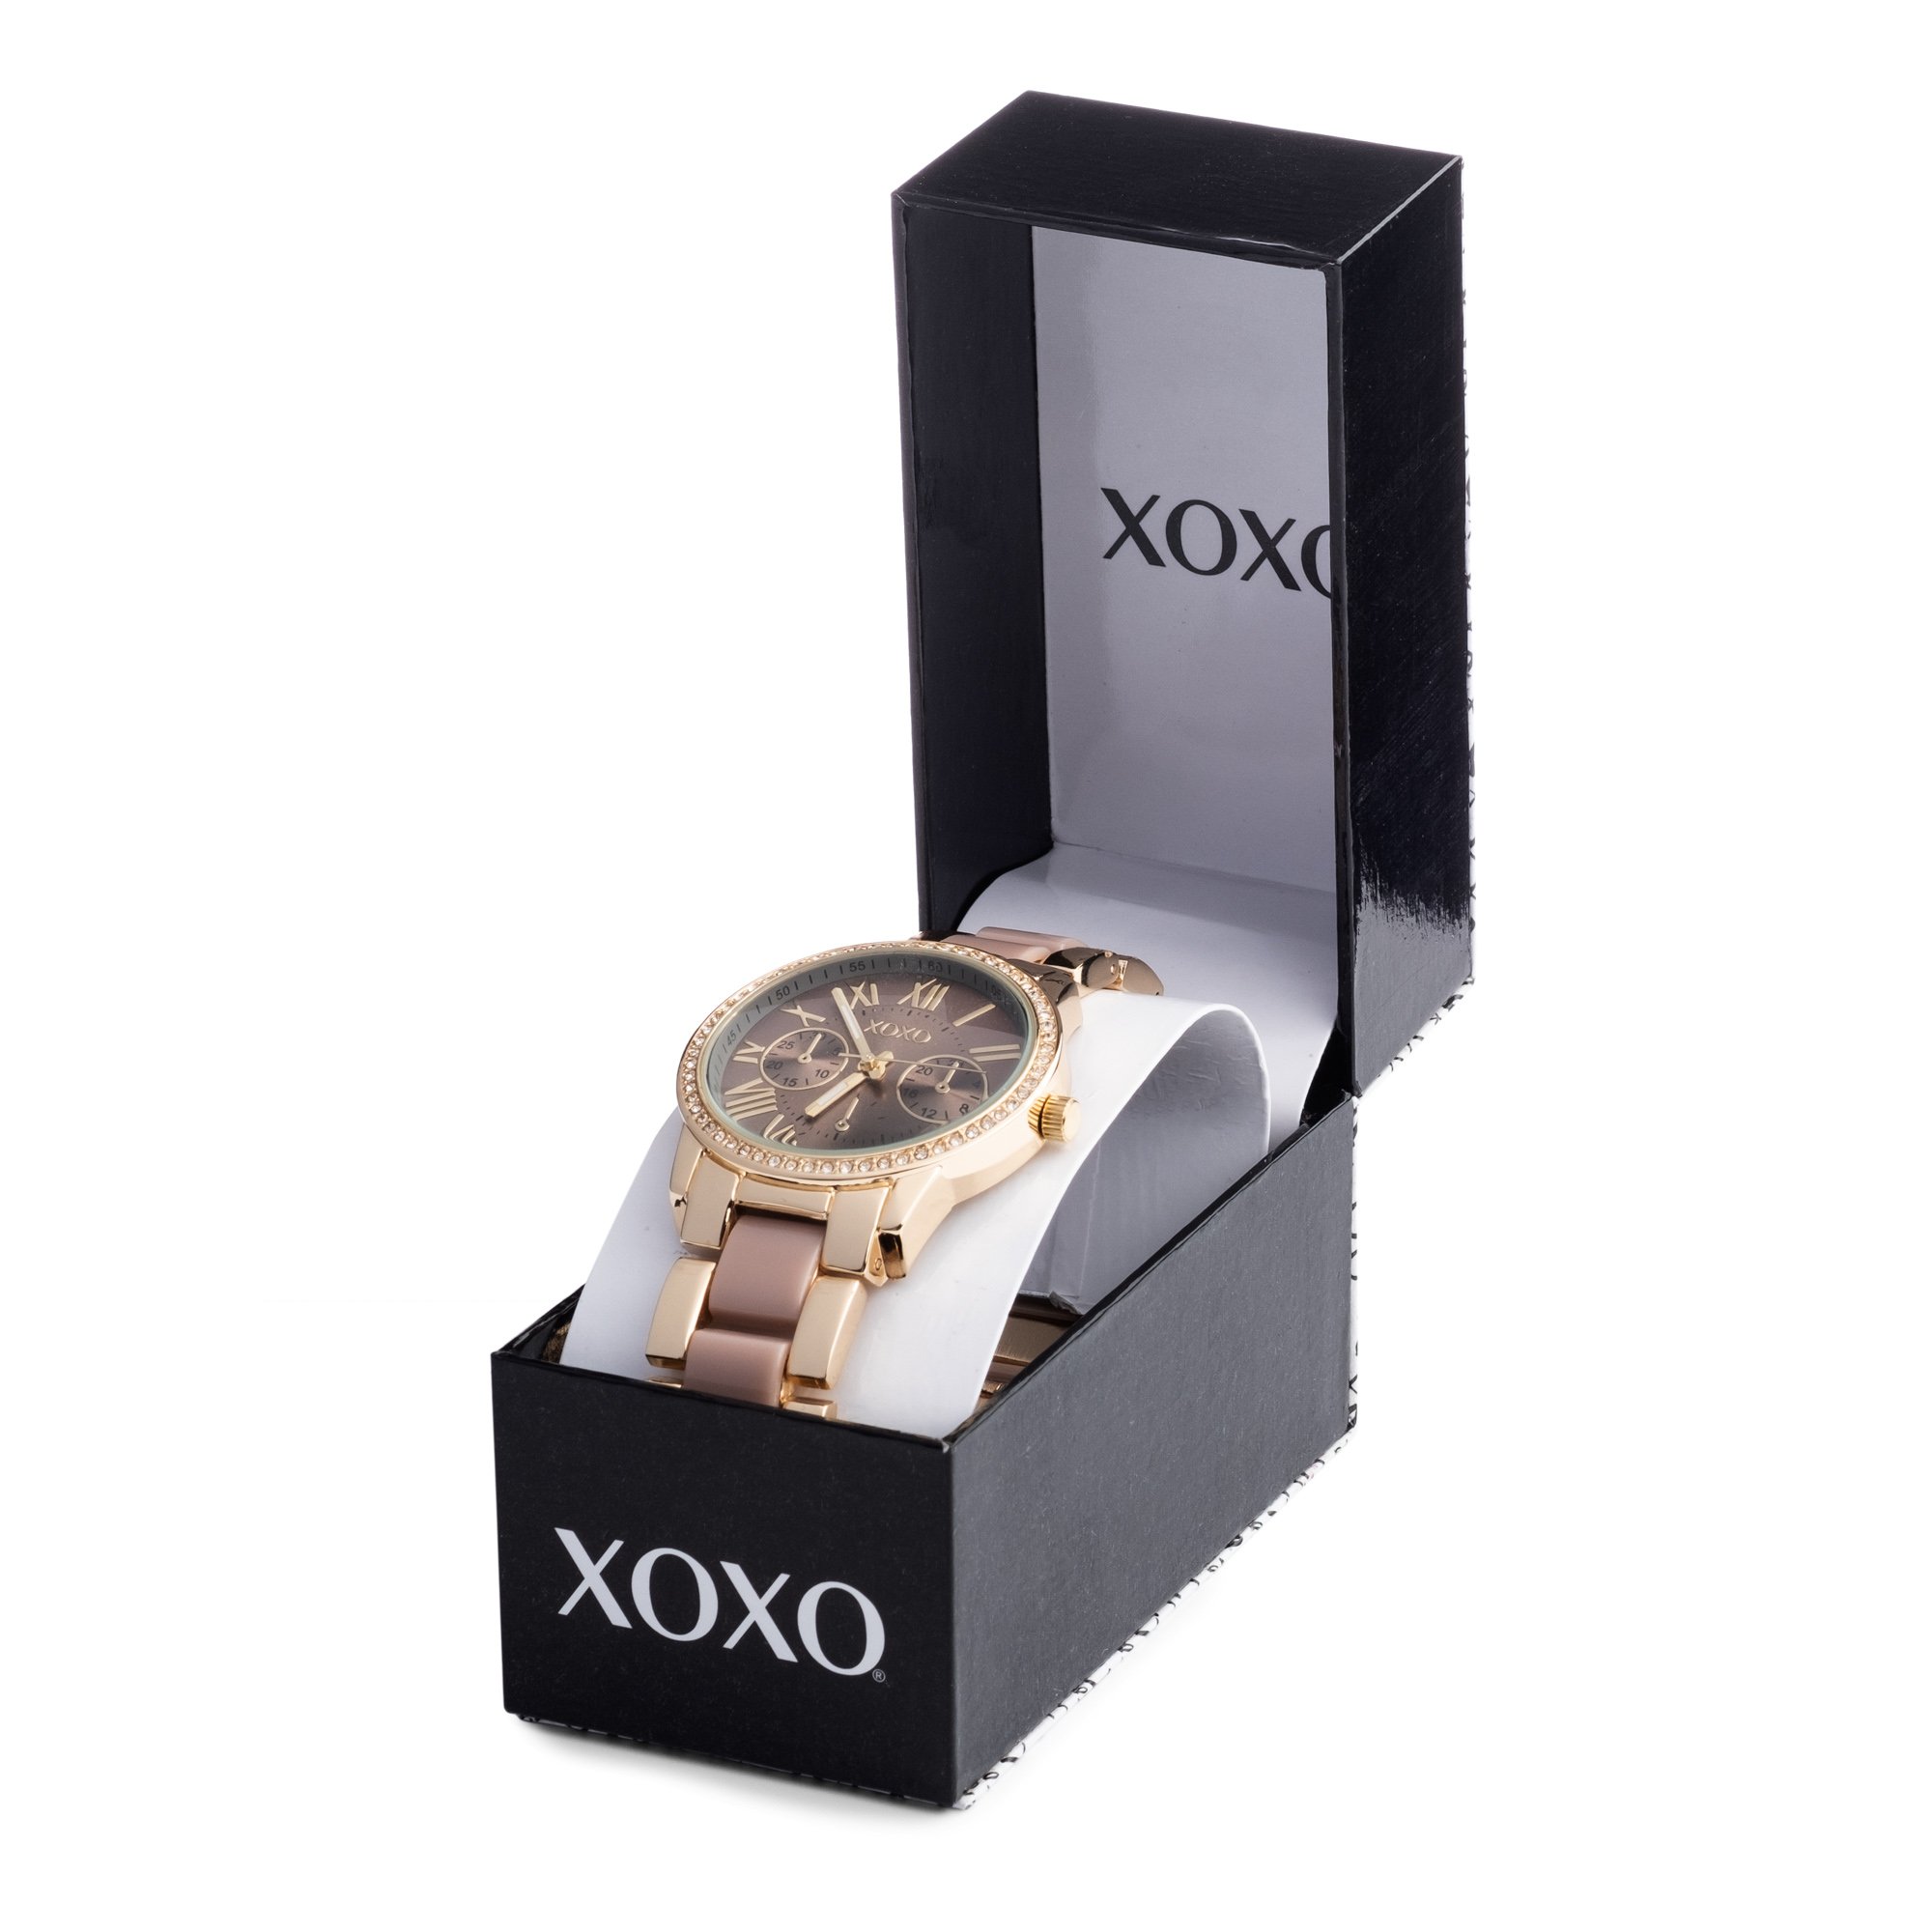 Accutime XOXO Women's Analog Watch with Gold-Tone Case, Crystal-Inset Bezel, Fold-Over Clasp - Official XOXO Woman's Gold and Rose Gold Watch, Two-Tone Chain Link Strap - Model: XO5873